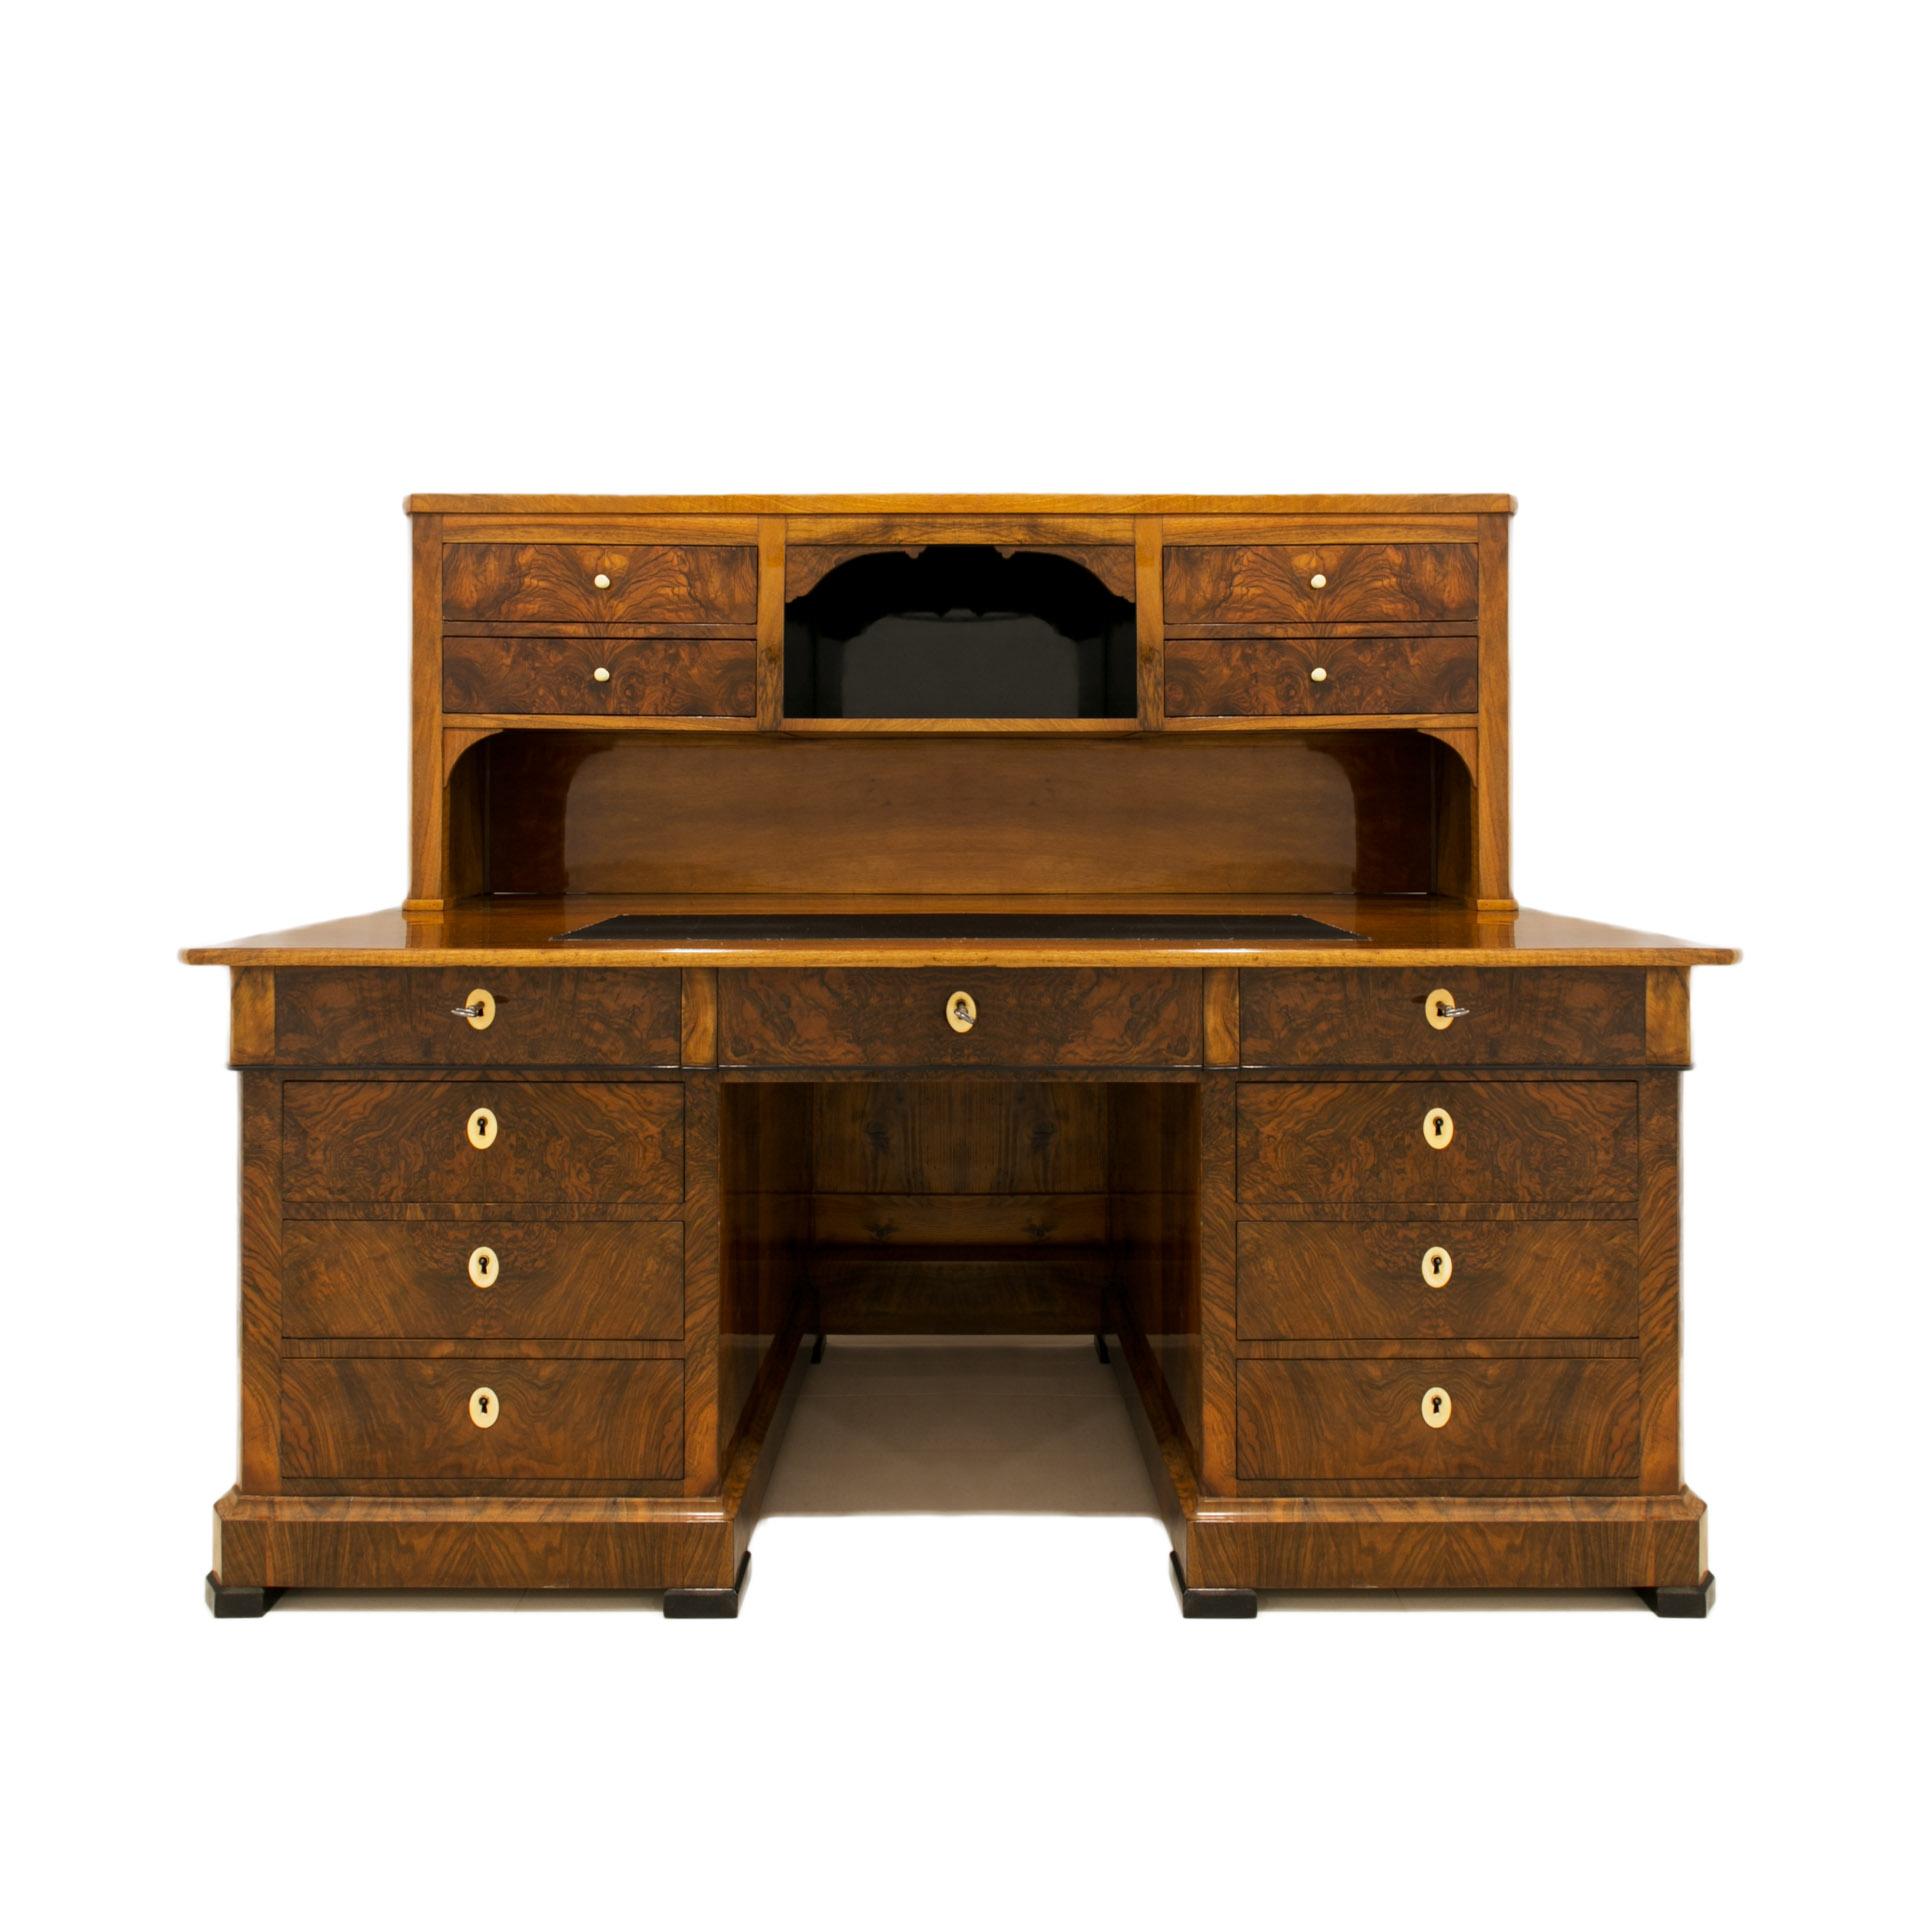 This is a beautiful desk from the Biedermeier period. It comes from Germany and was made in 19th Century. A very elegant and functional piece of furniture, veneered with walnut. The desk has two rows of lockable drawers, the top has a leather cover.